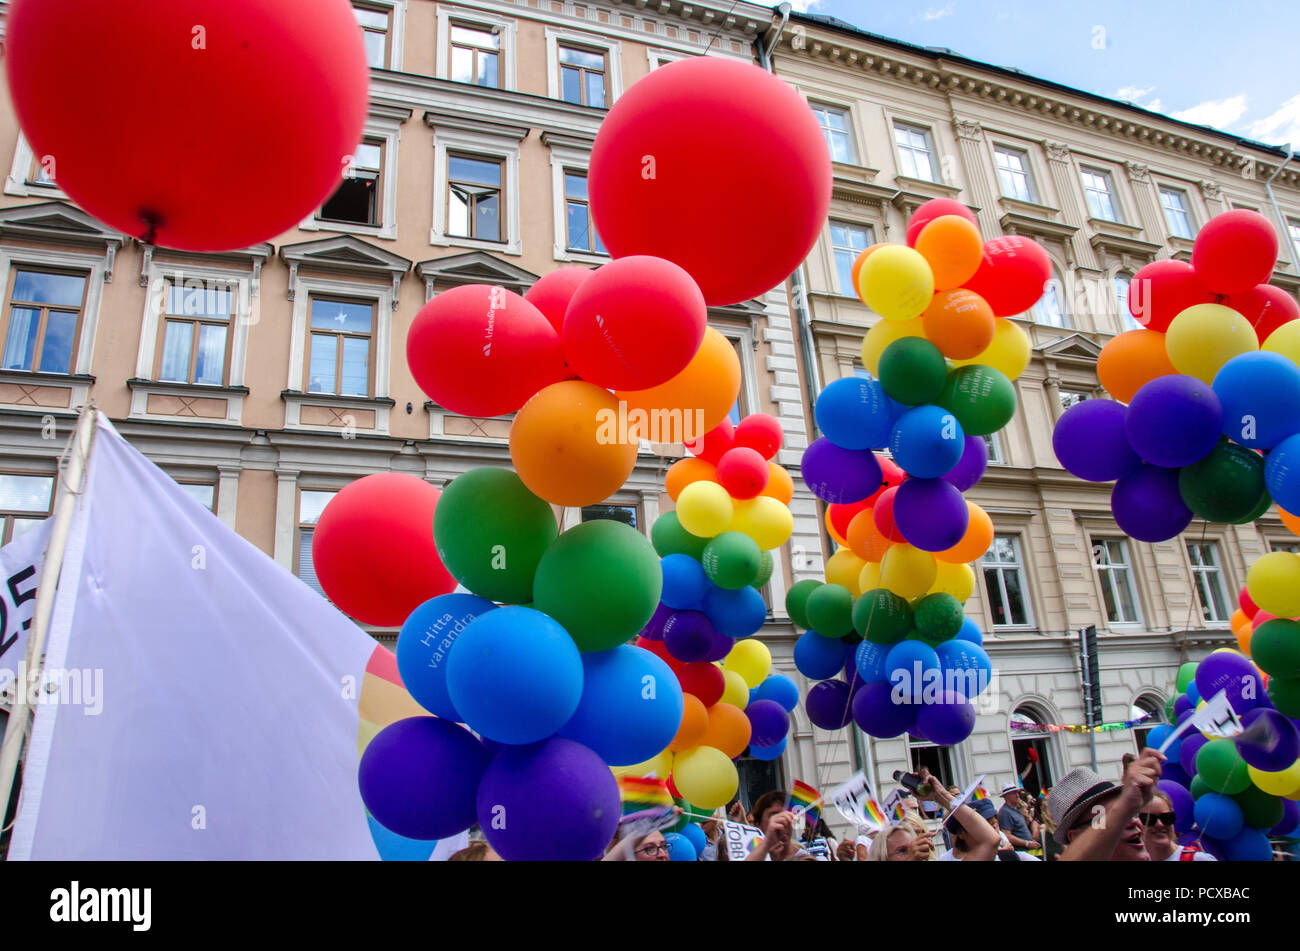 Stockholm, Sweden, 4 Aug 2018. The Europride parade goes through the streets of Stockholm. Credit: Jari Juntunen/Alamy Live News Stock Photo